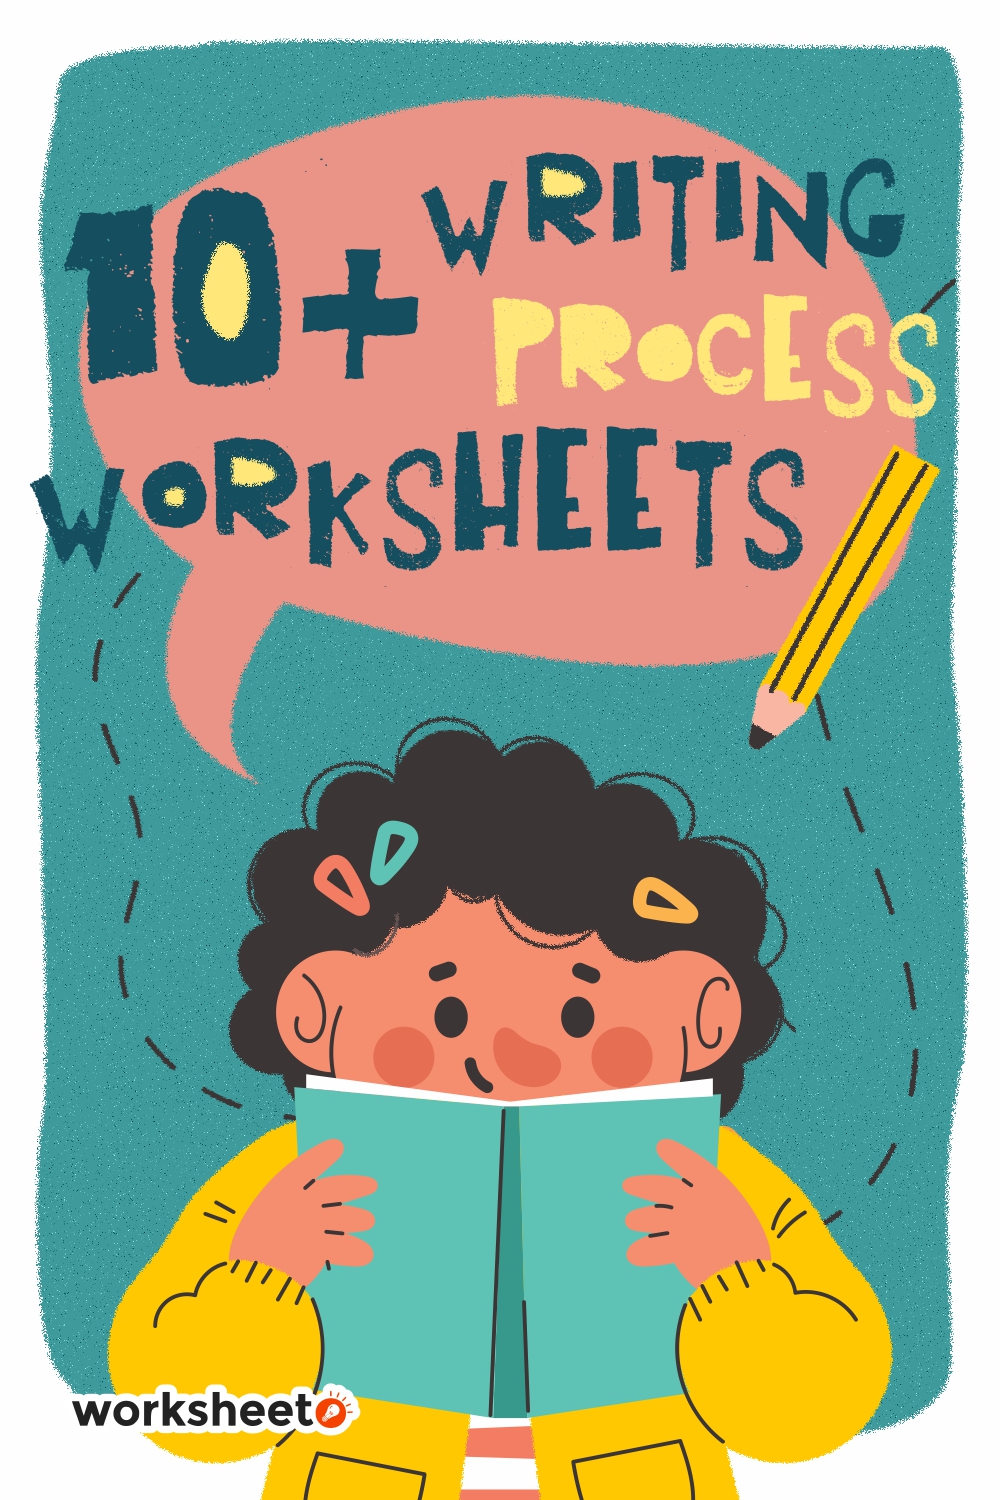 12 Images of Writing Process Worksheets